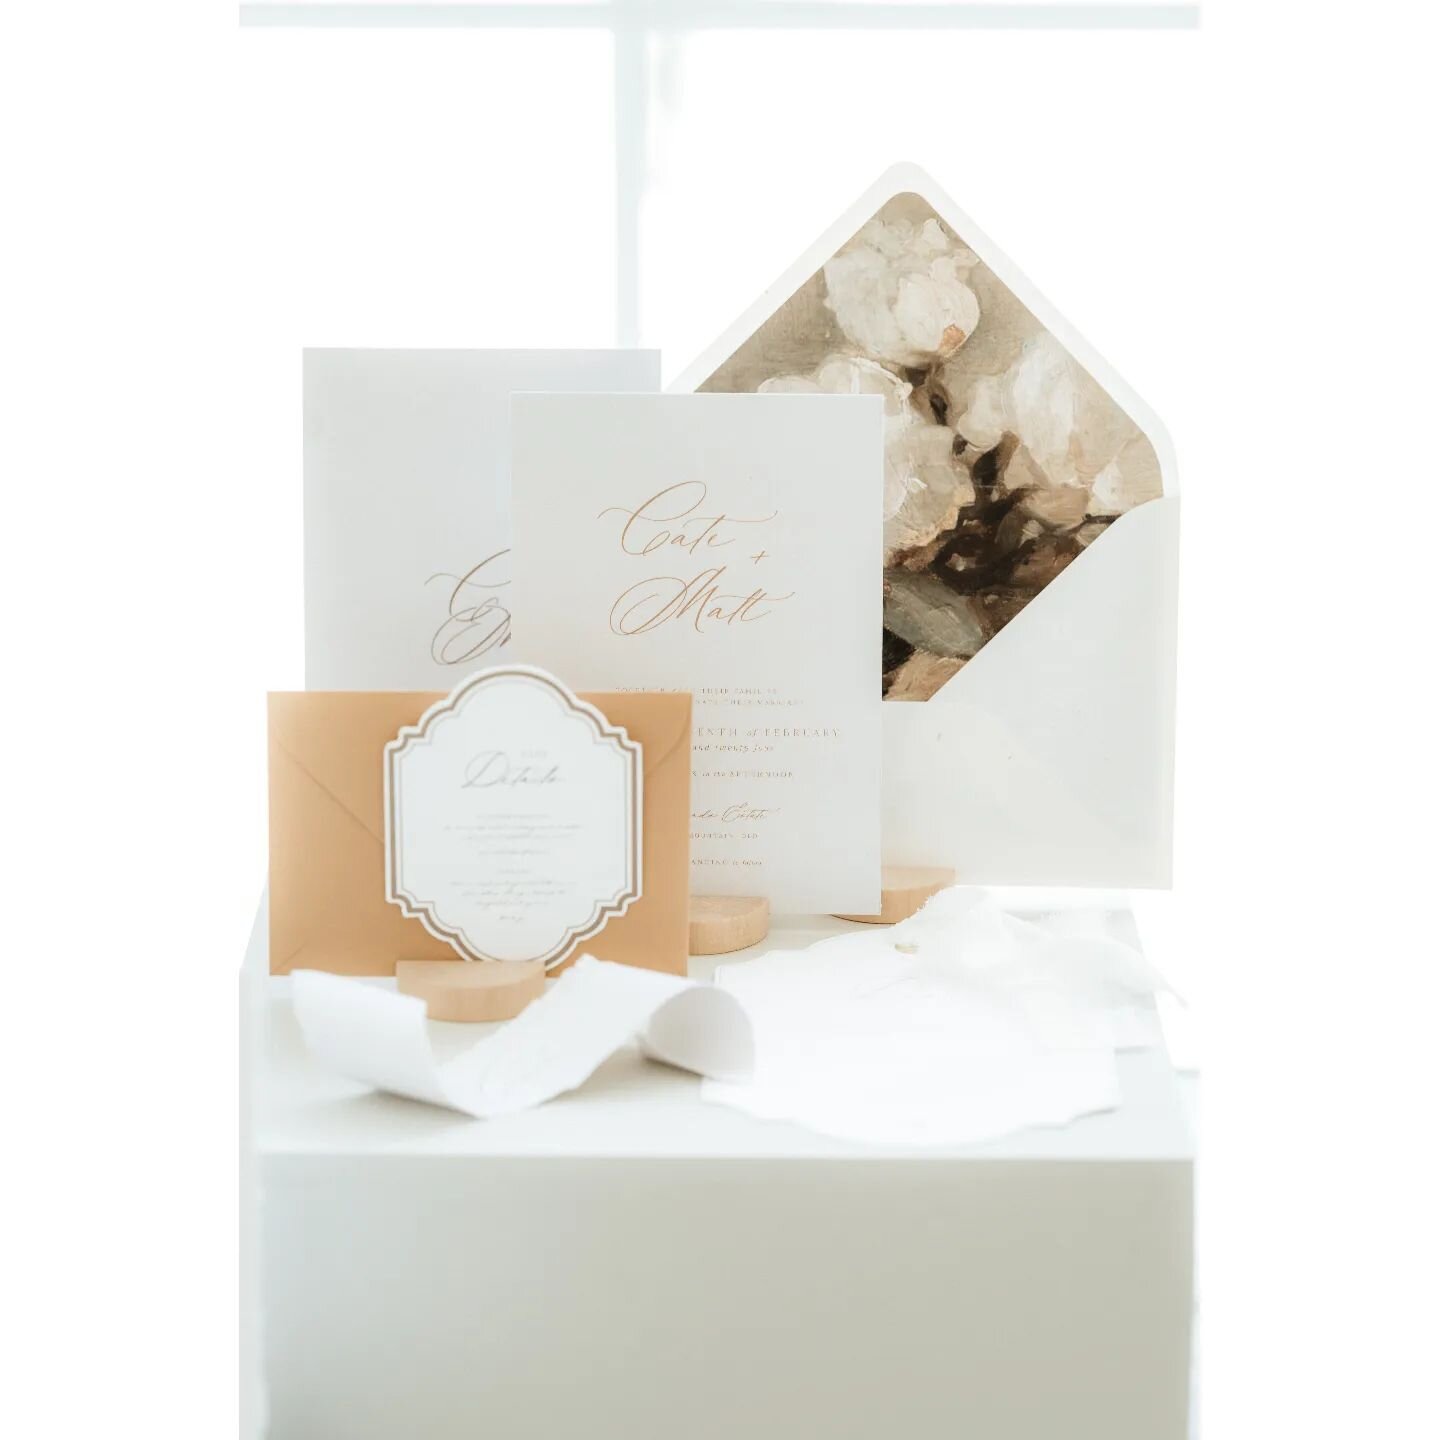 The magic that was at @thegroundsestate with @lovelenscapesphotography for @weddingcollectivegoldcoast
.
#smallbusiness #littlegreenleaf #littlegreenleafstationery #simplicity #signage #weddingsigns #timeless #wedding #goldcoast #white #stationery #o